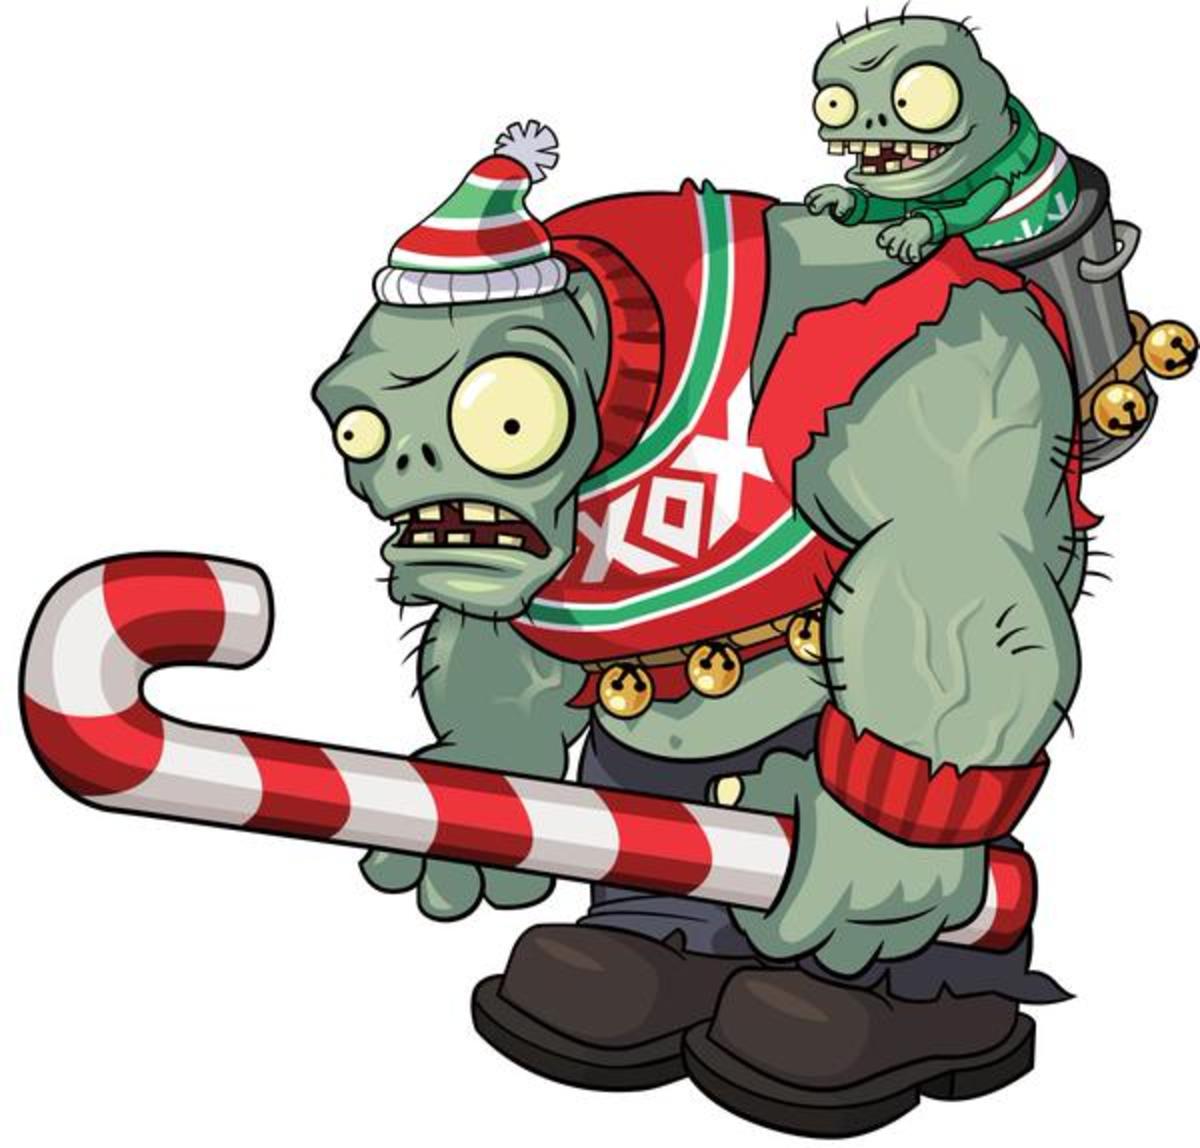 Plants Vs Zombies: Which Zombie Are You? | HubPages